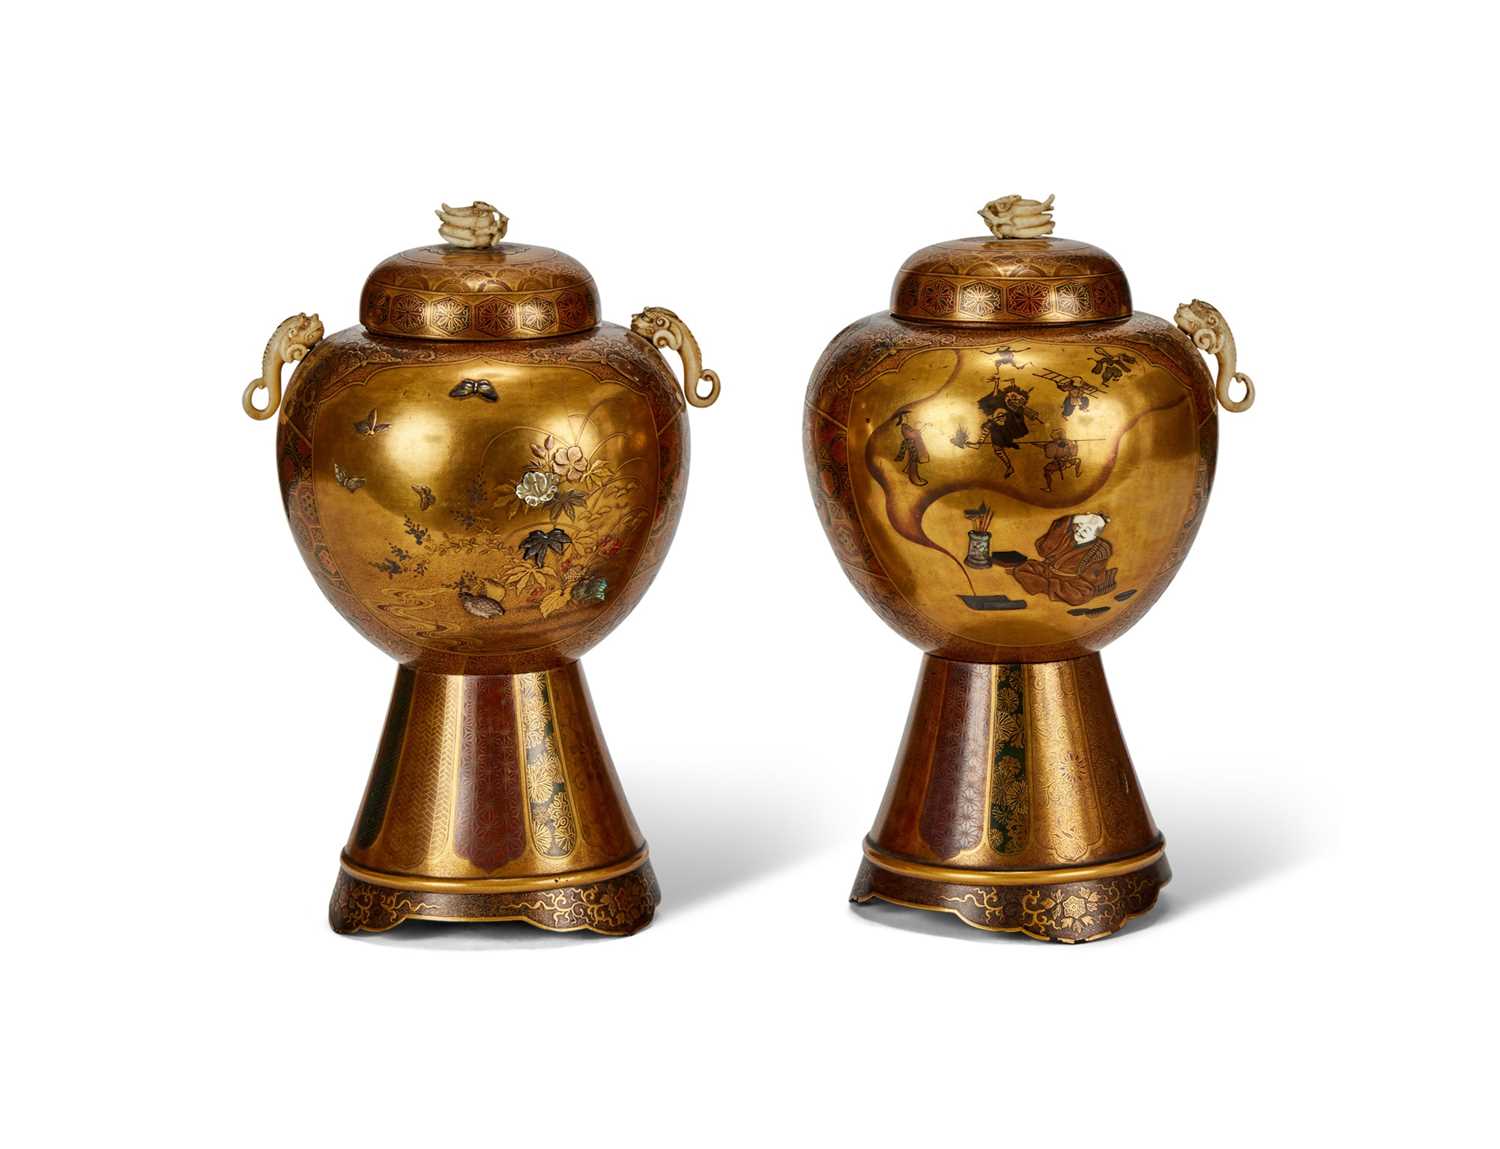 AN EXCEPTIONAL PAIR OF JAPANESE MEIJI PERIOD GOLD LACQUER AND SHIBAYAMA INLAID URNS